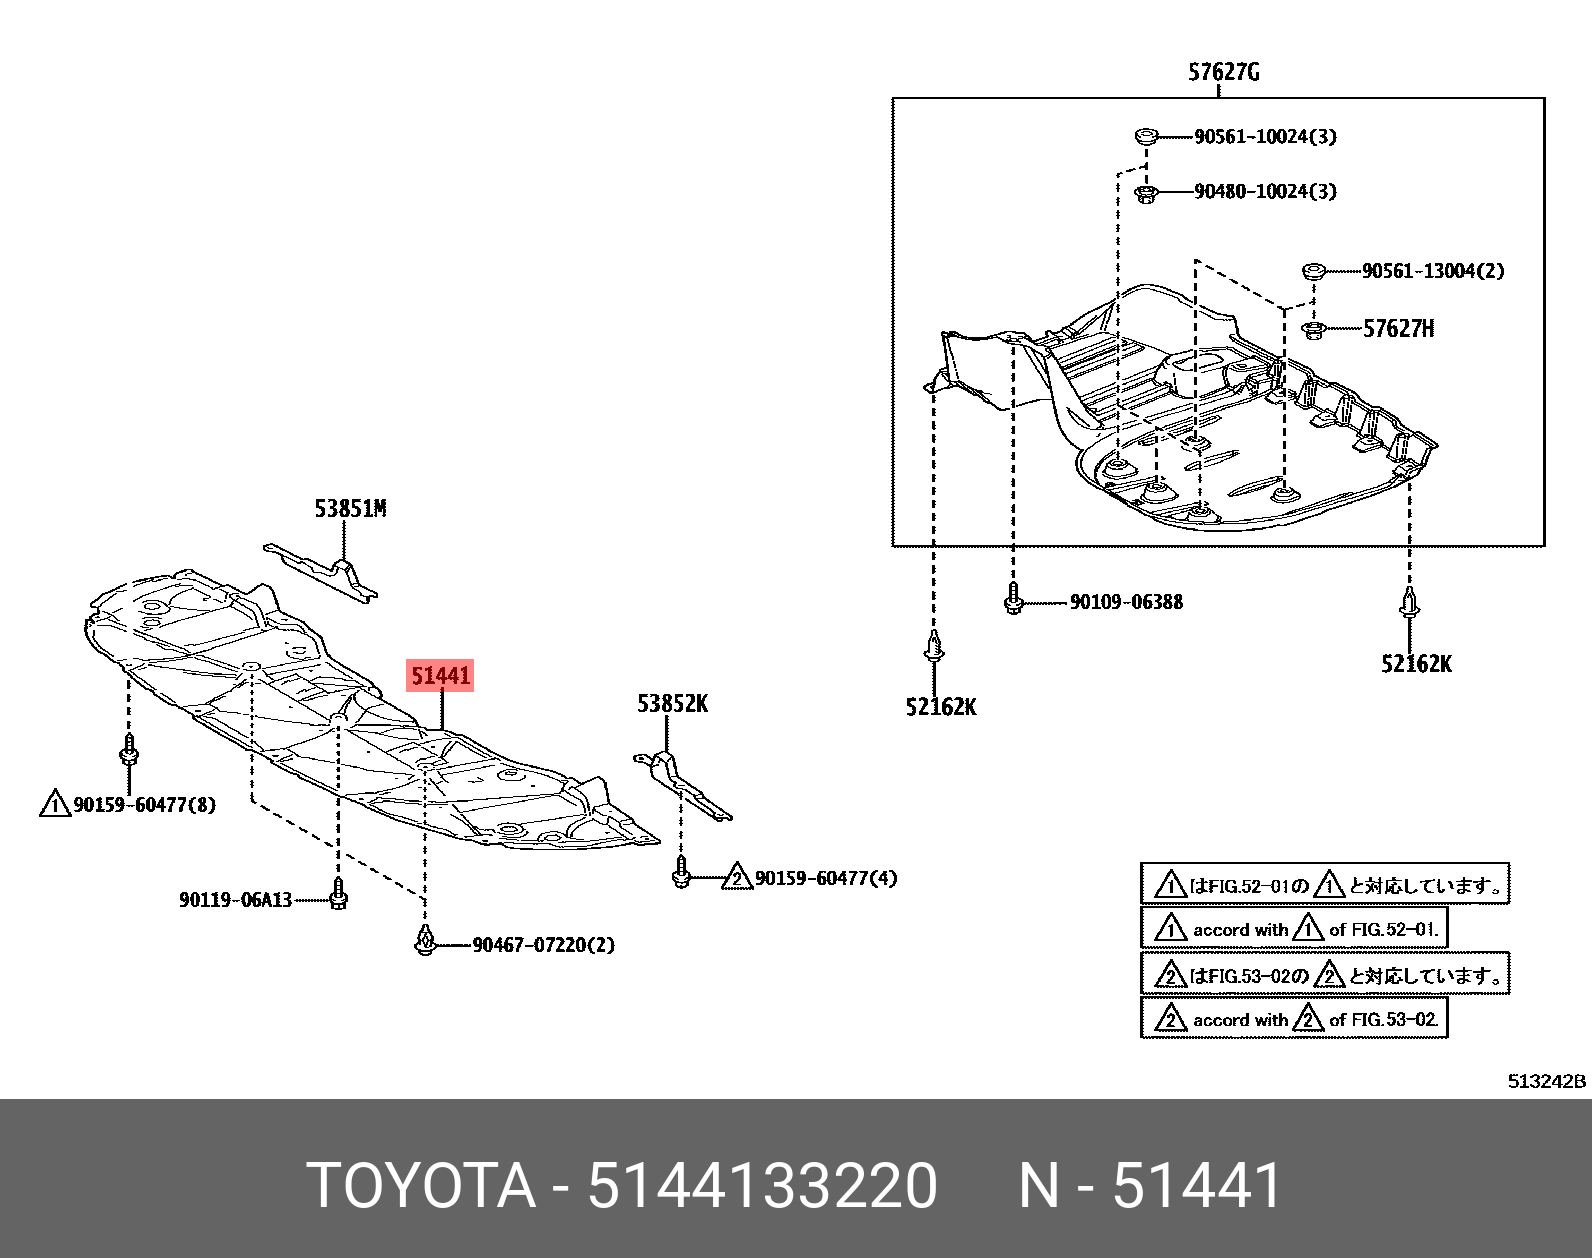 CAMRY 201706-, COVER, ENGINE UNDER, NO.1